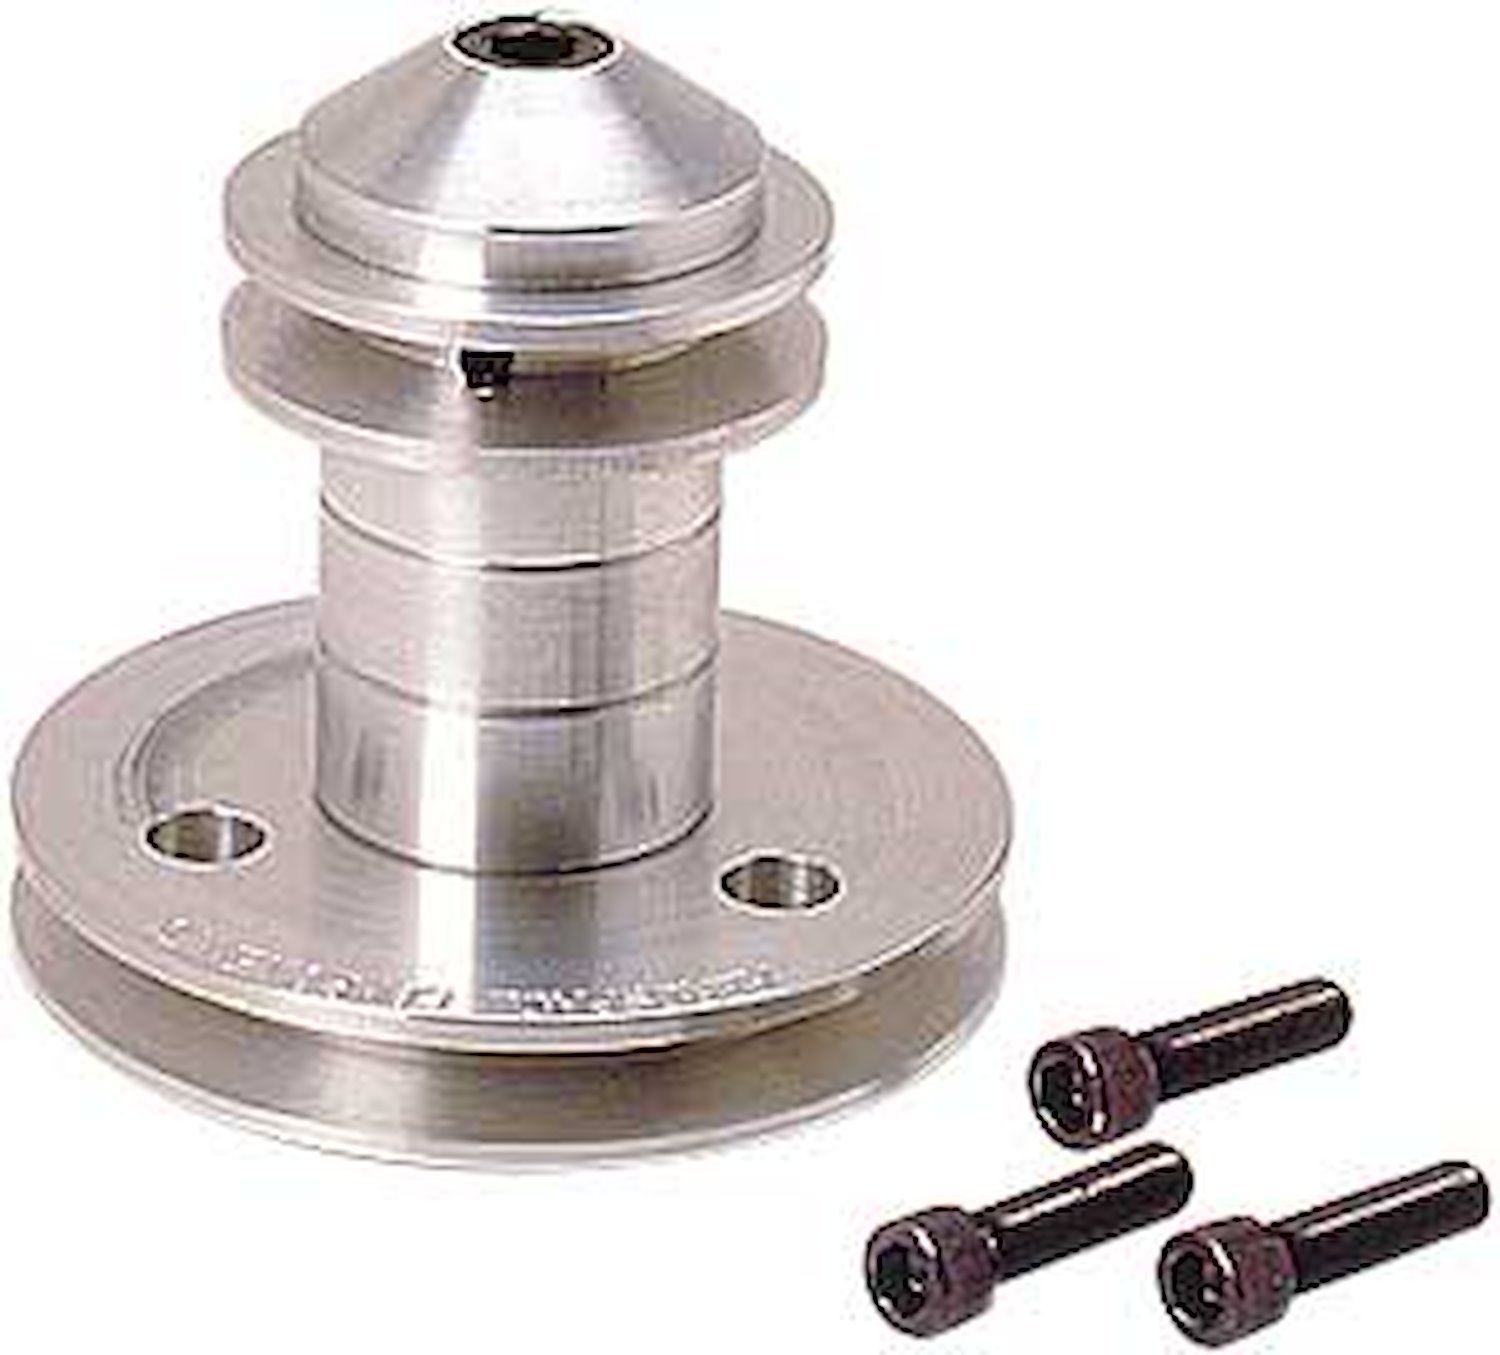 AC-MS-BBC Mandrel Drive for Big Block Chevy Engines